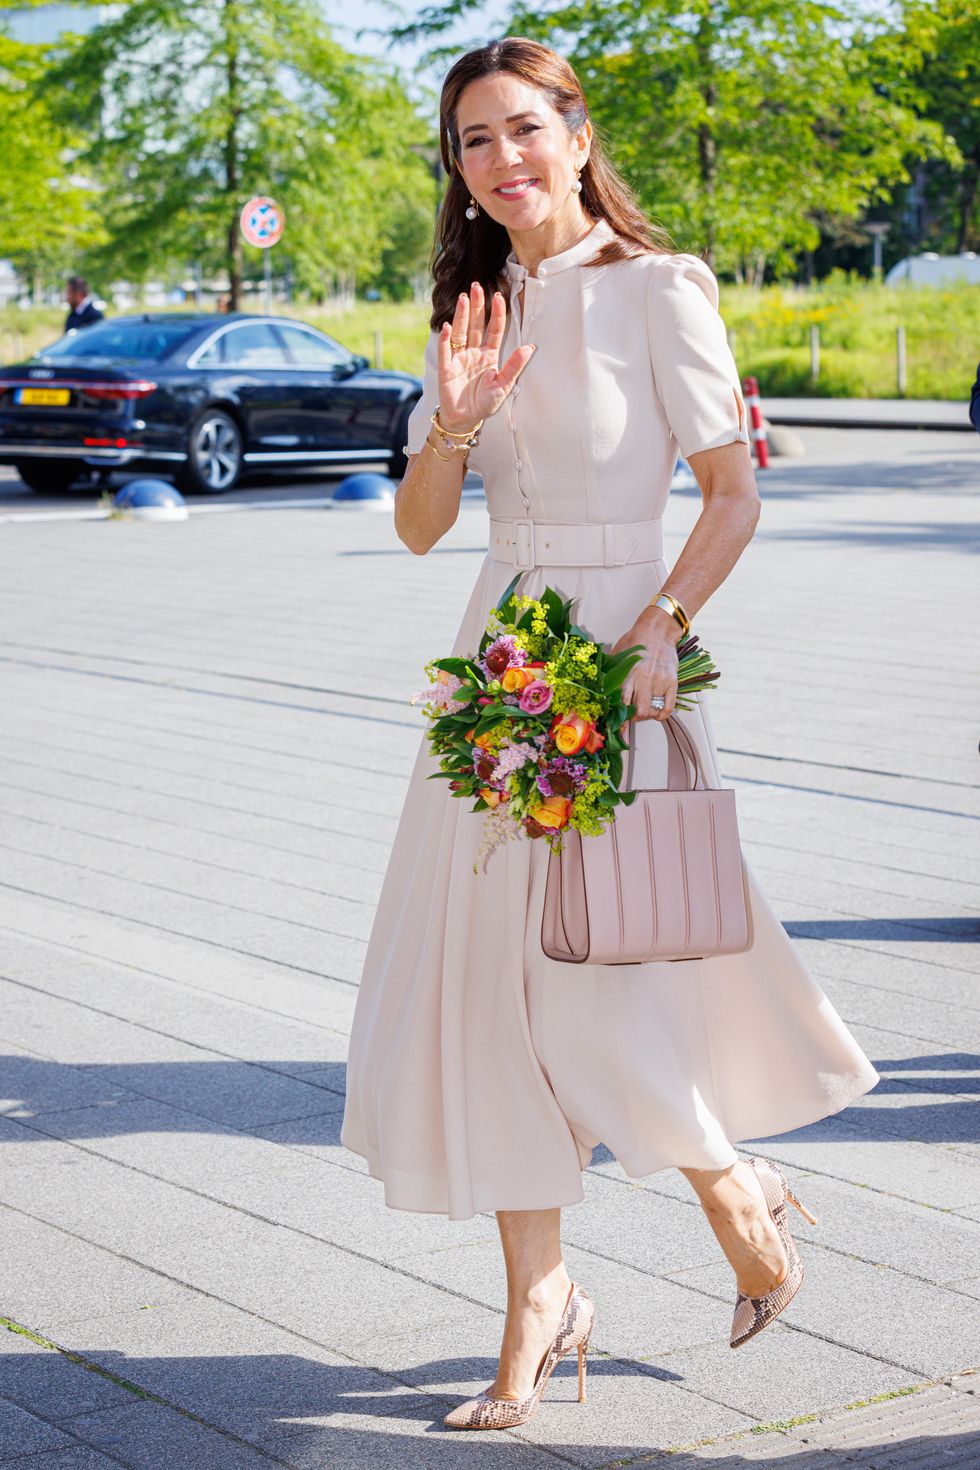 leiden, netherlands june 21 crown princess mary of denmark visits the willem alexander childrens hospital at the leiden university medical center on june 21, 2022 in leiden, netherlands photo by patrick van katwijkgetty images local caption crown princess mary